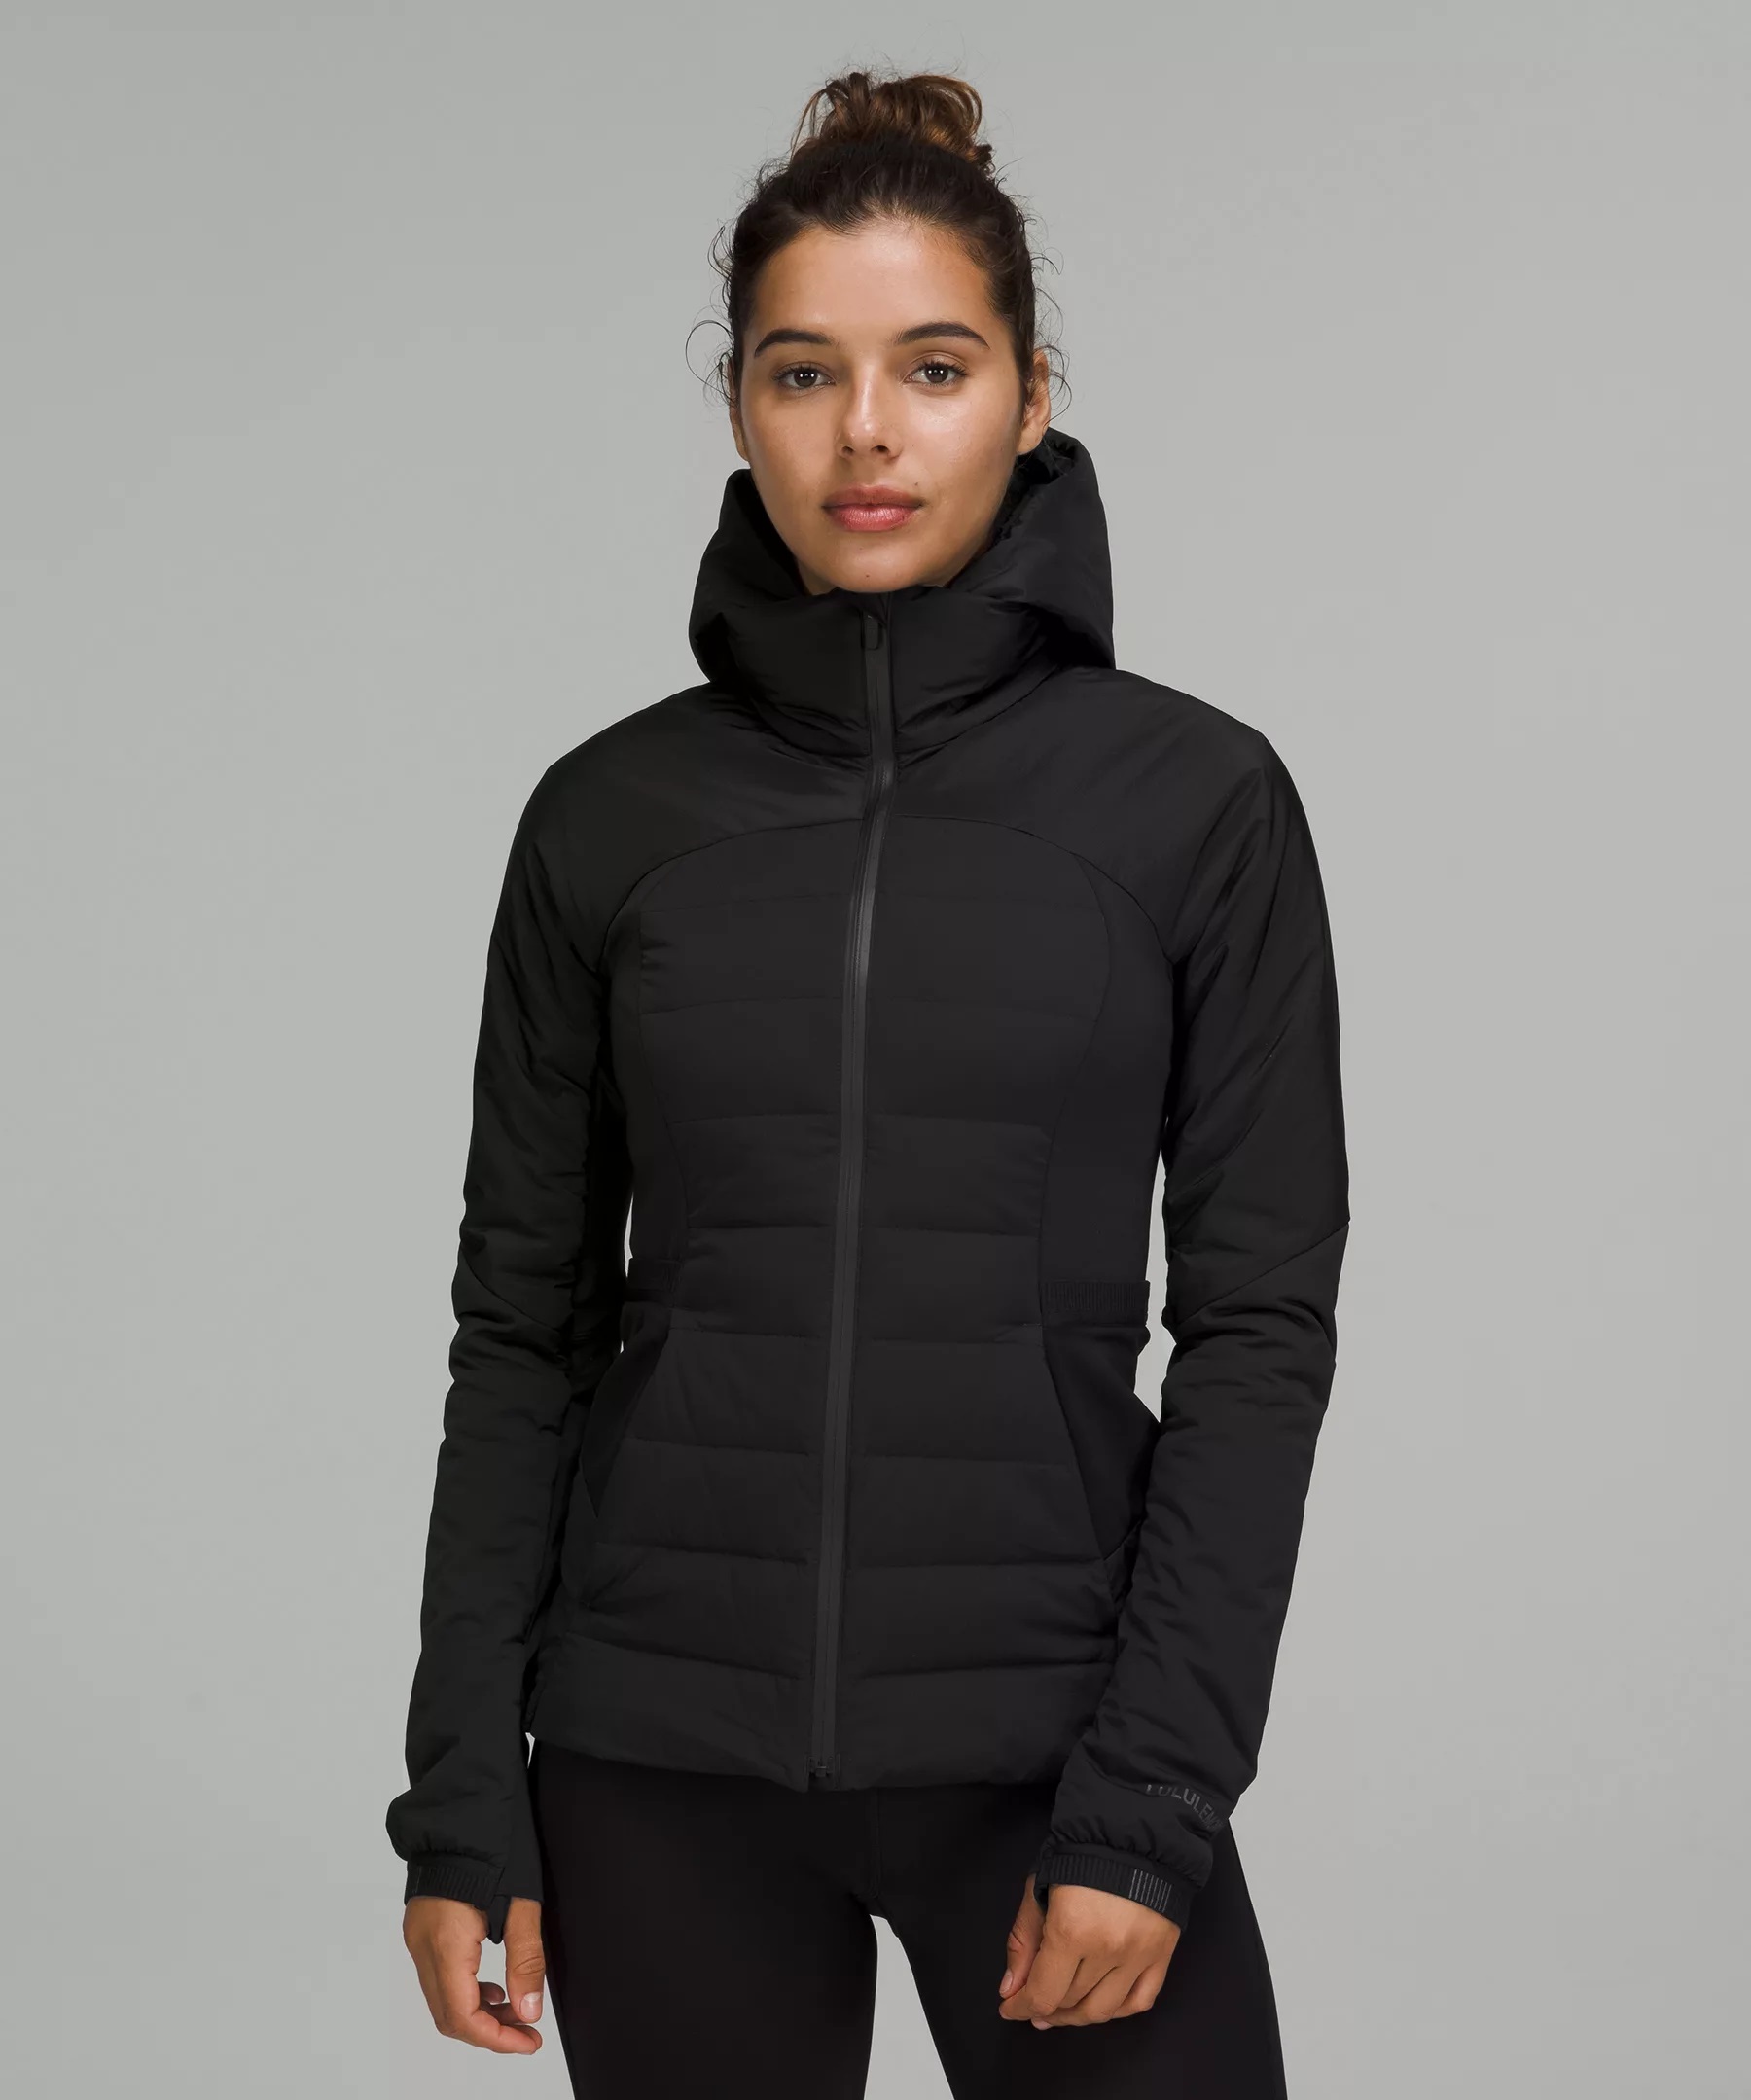 Our 10 Best Waterproof Running Jackets - The Edge Sports Cork